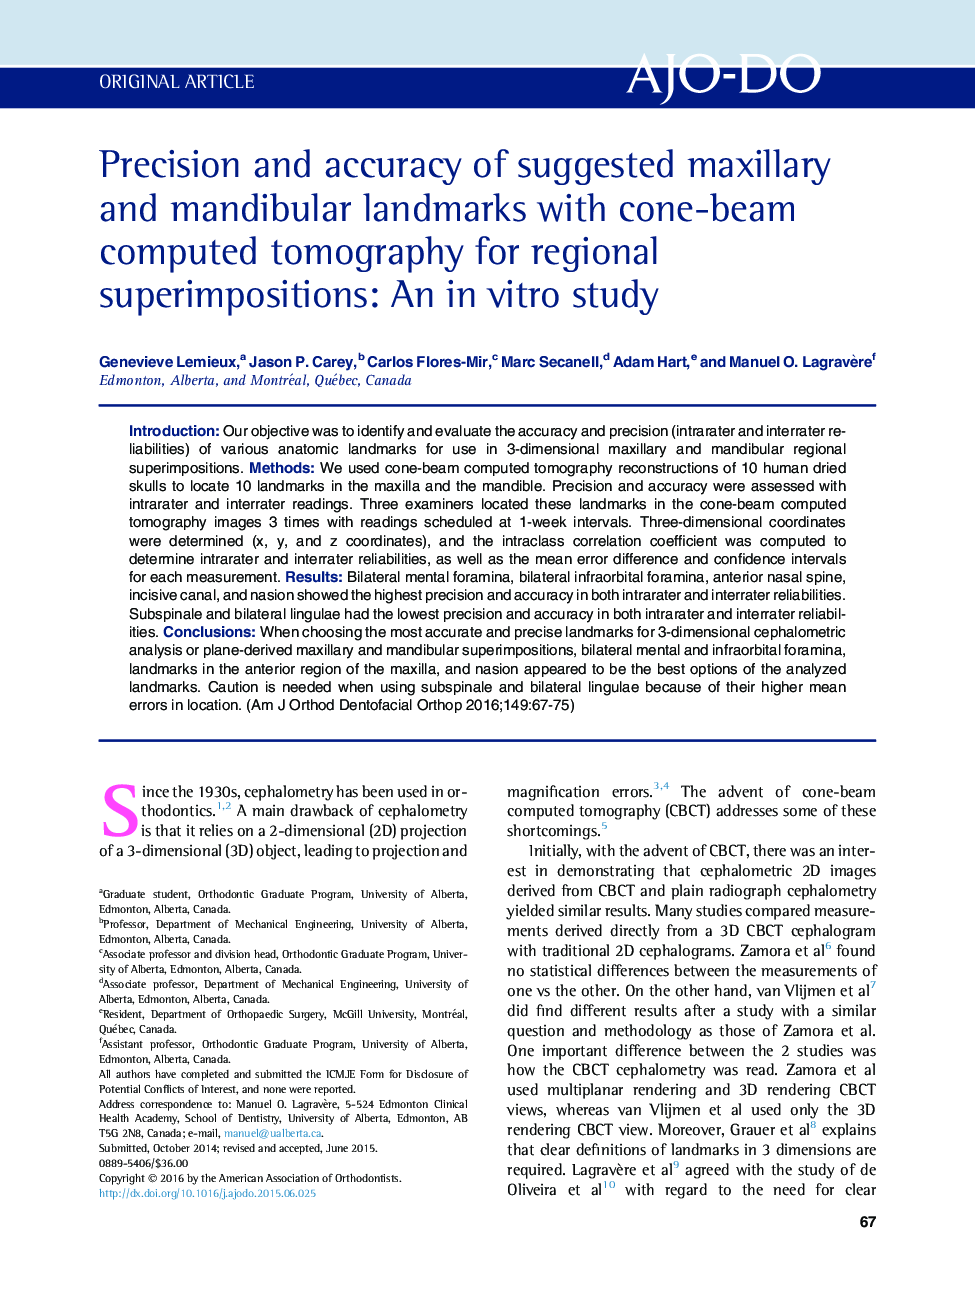 Precision and accuracy of suggested maxillary and mandibular landmarks with cone-beam computed tomography for regional superimpositions: An in vitro study 